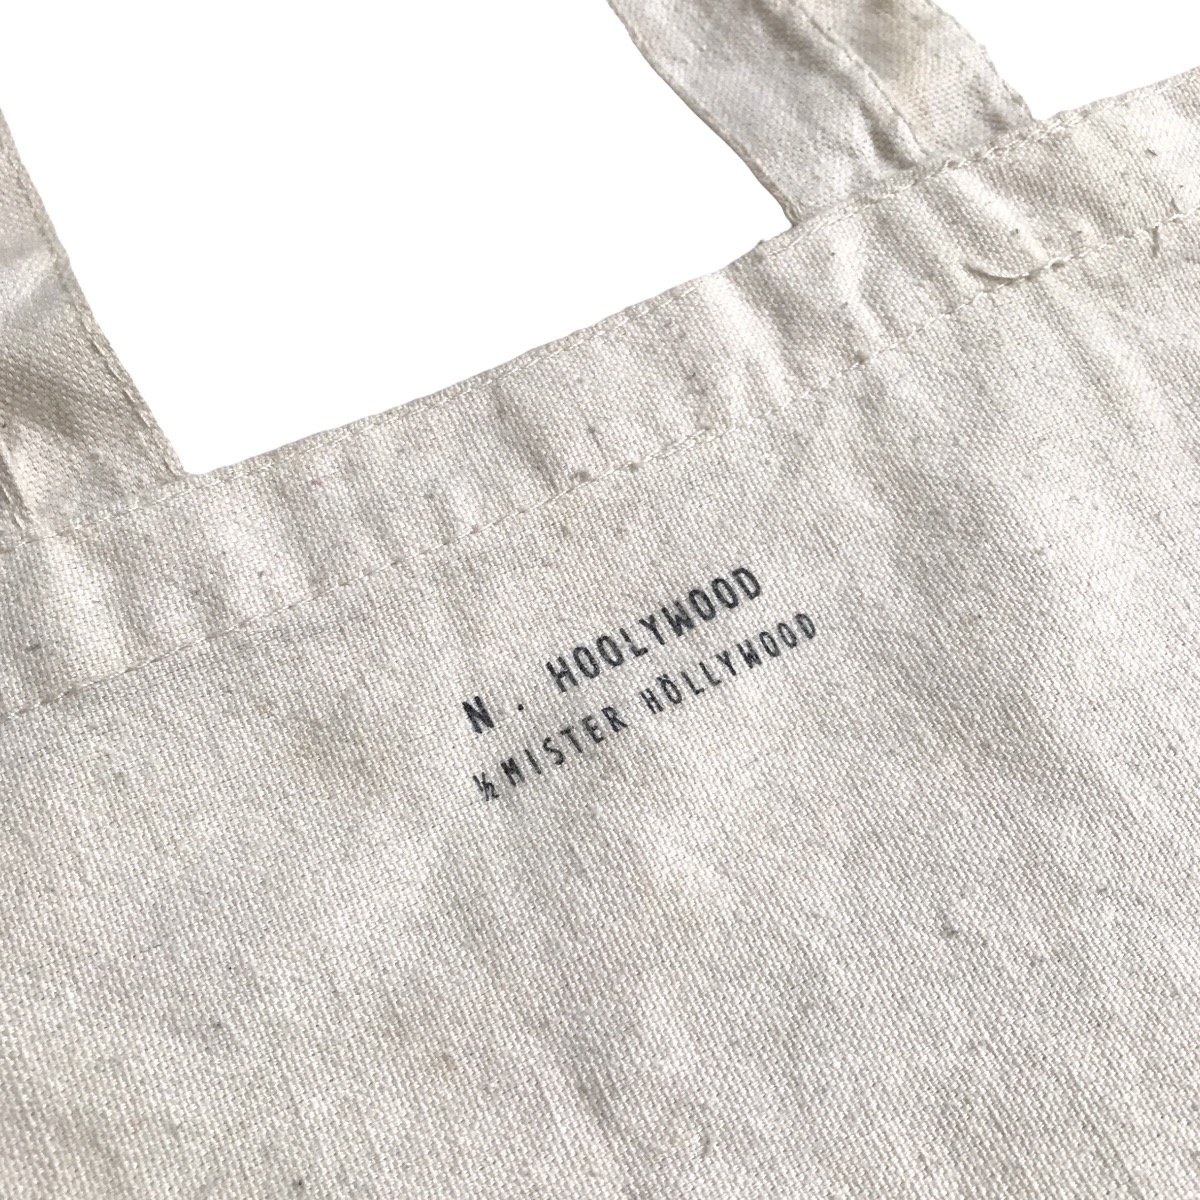 Authentic N. Hoolywood Japan Basic Canvas Tote Bag - 6